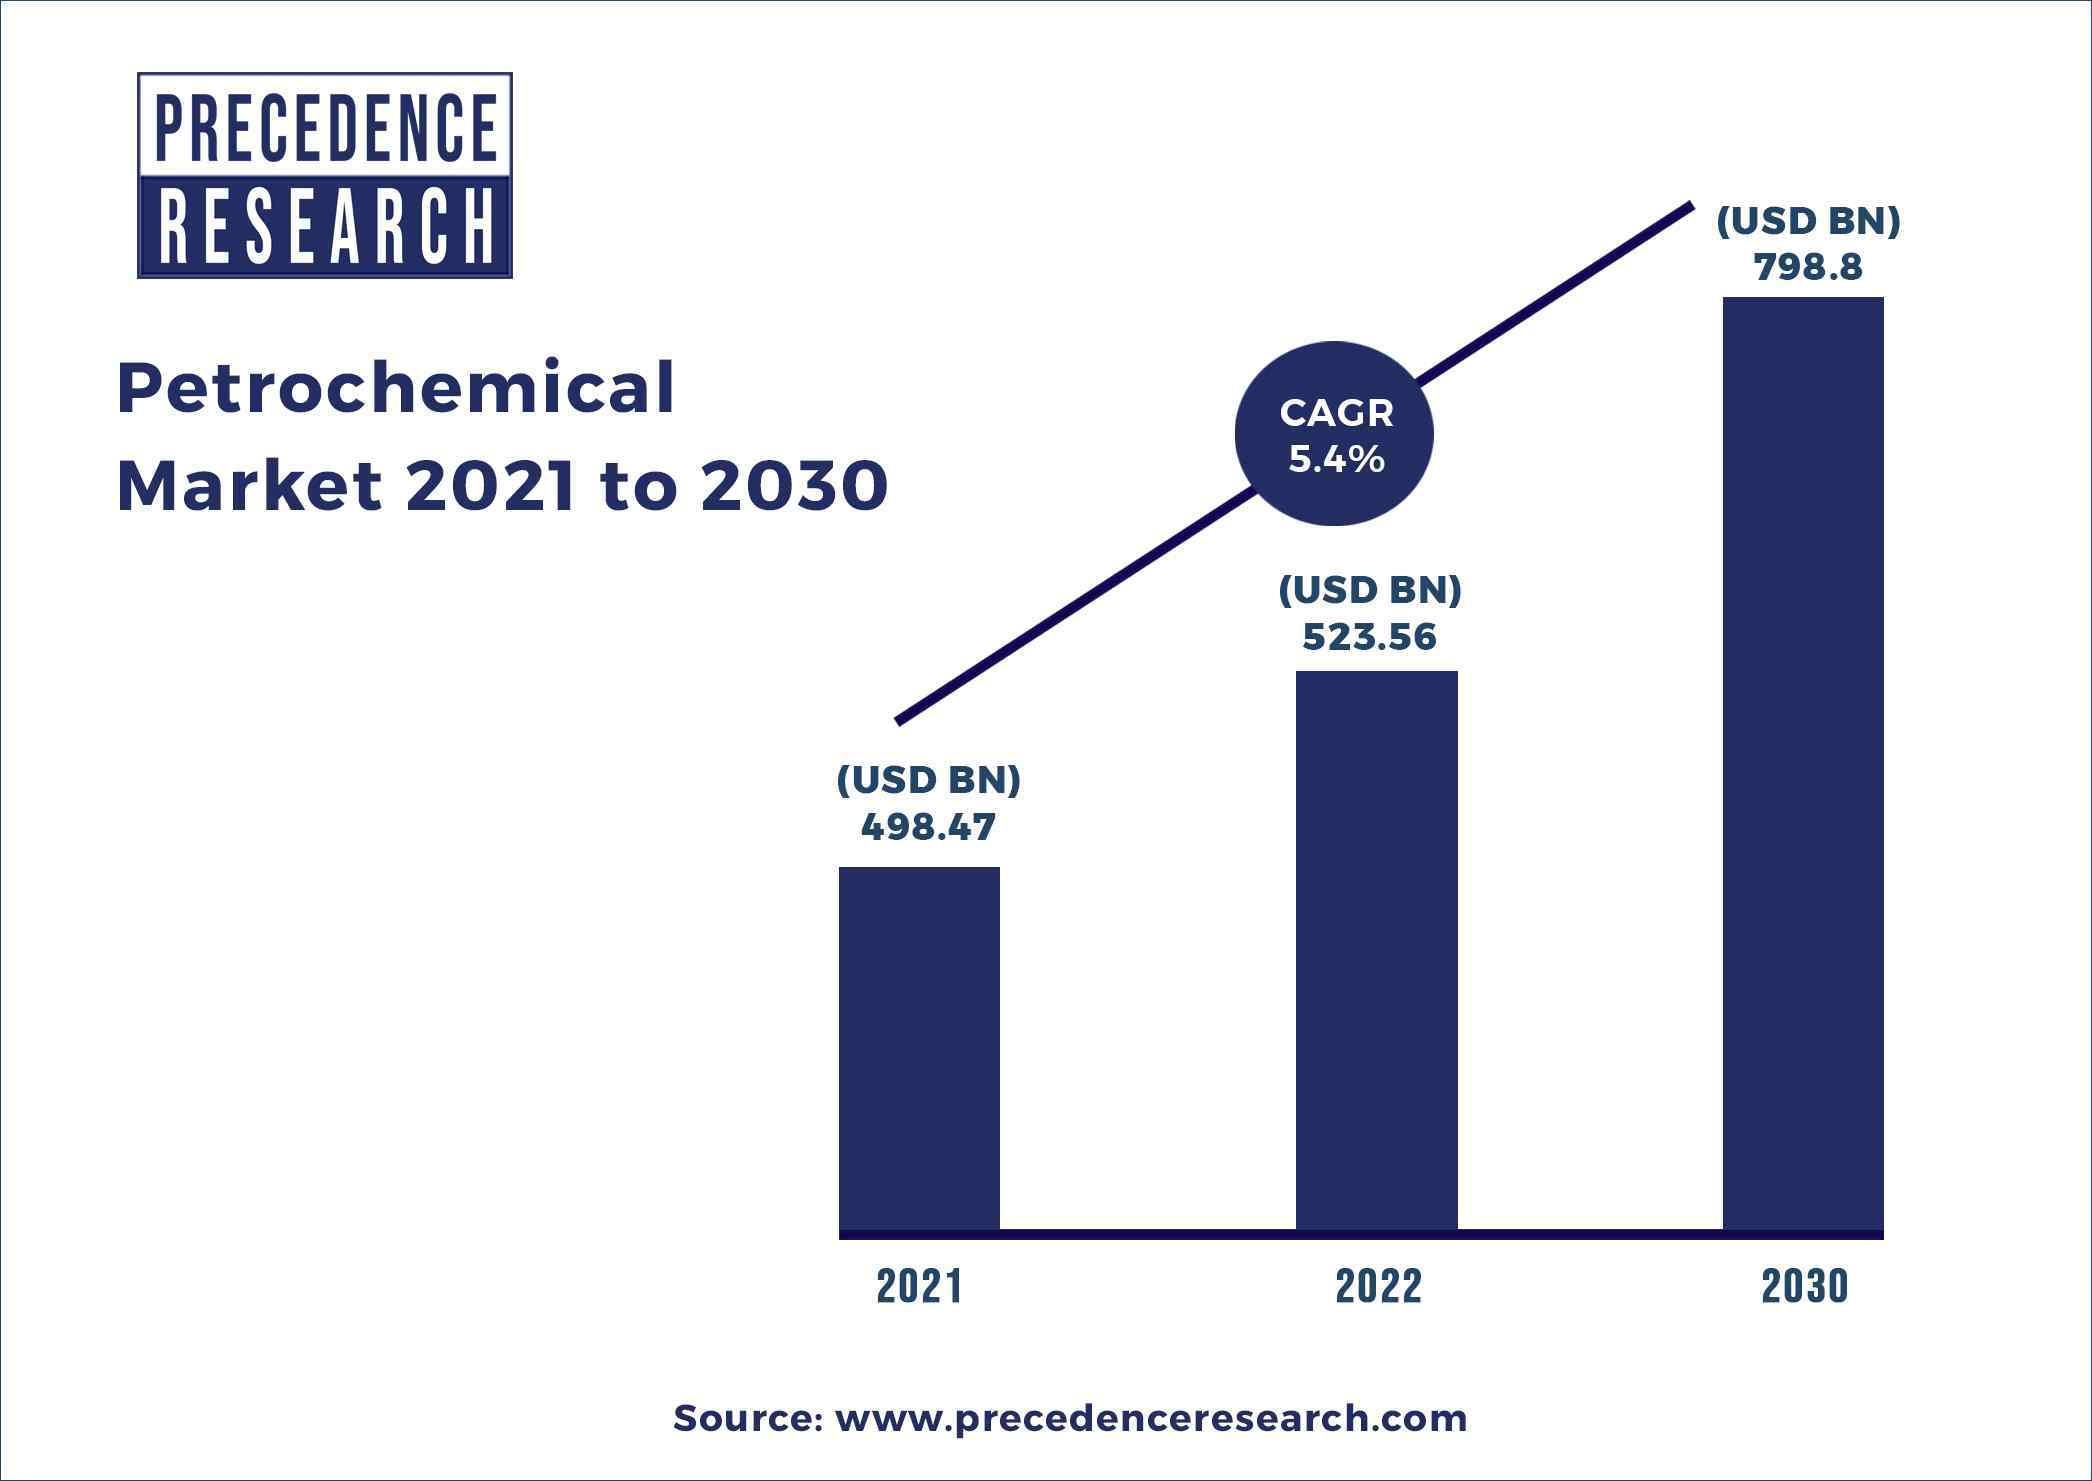 Petrochemical Market 2021 to 2030